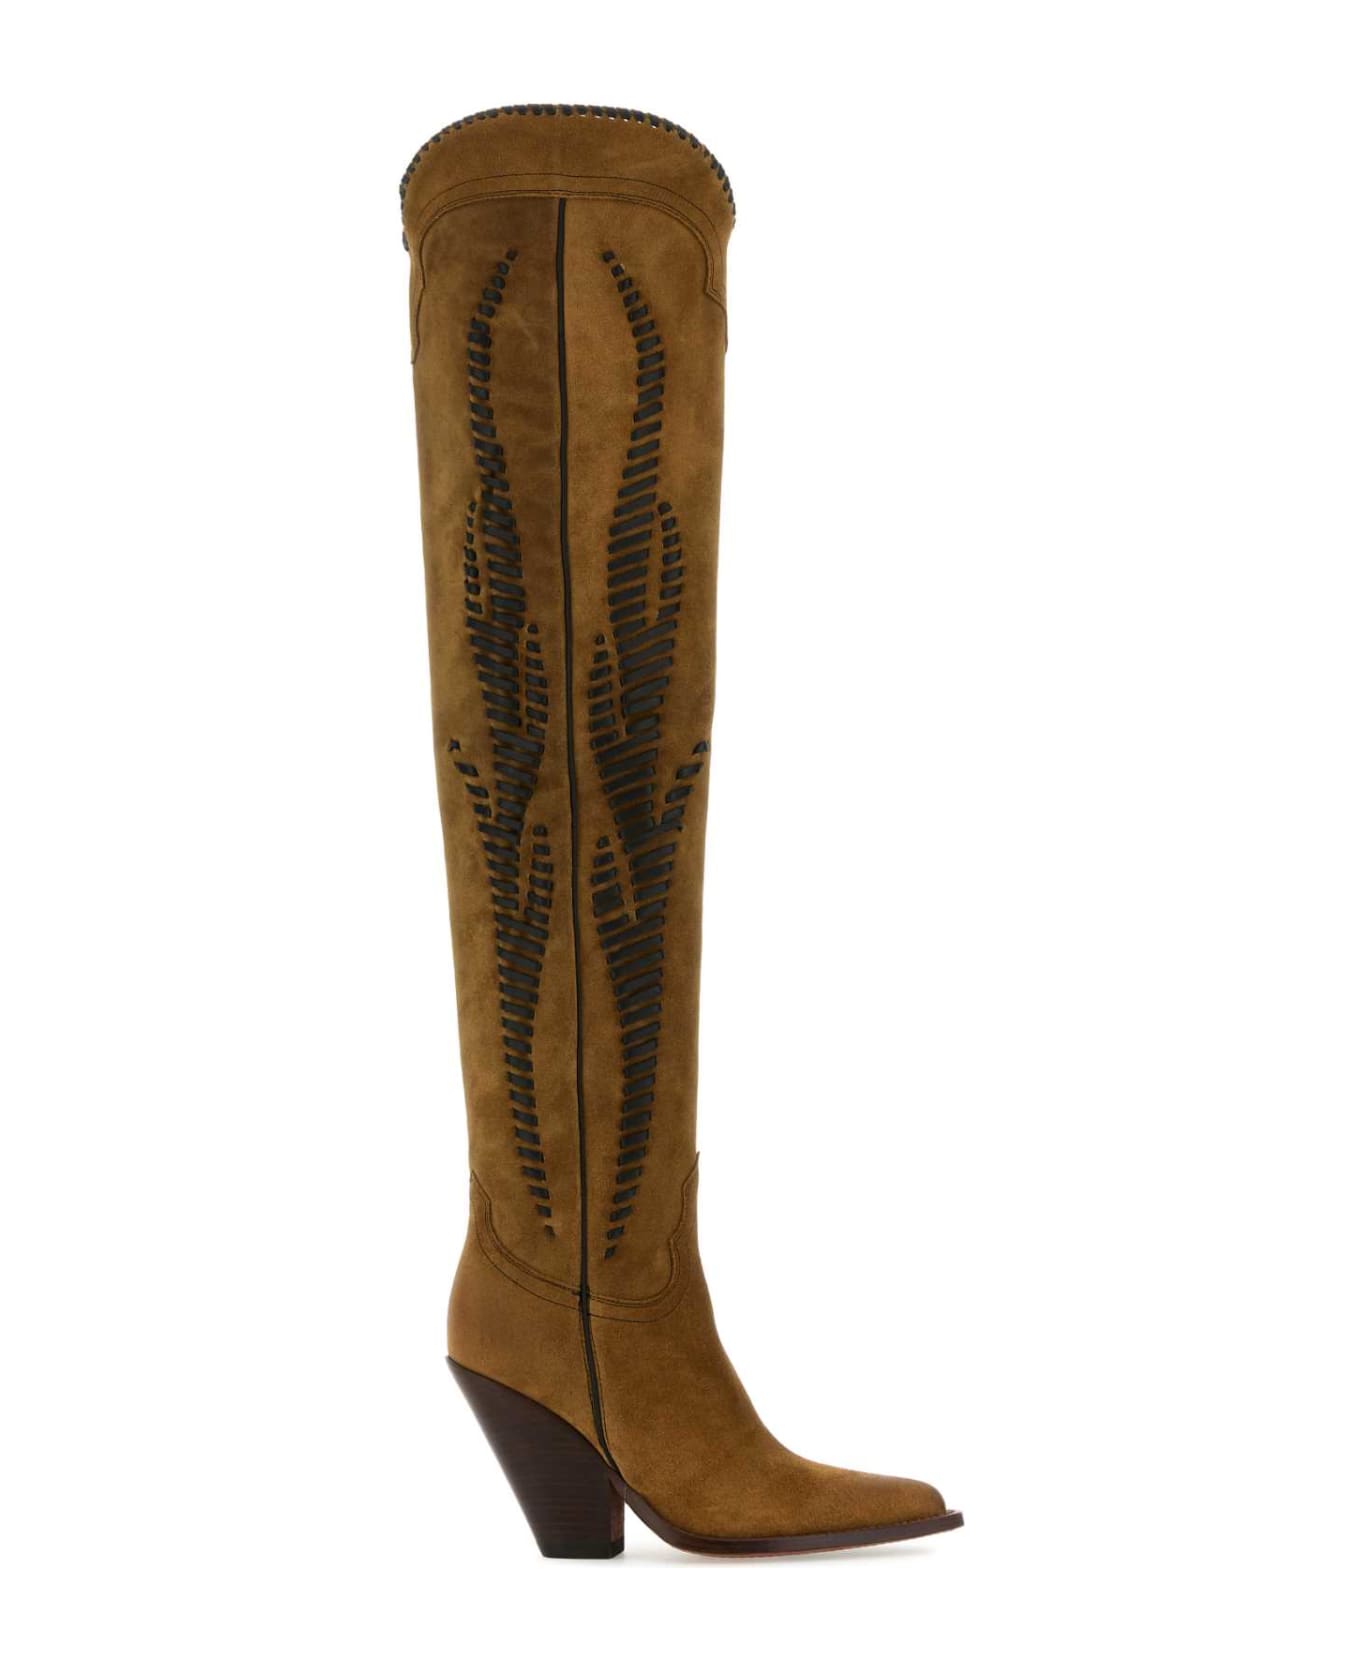 Sonora Camel Suede Hermosa Twist Over-the-knee Boots - CAMEL